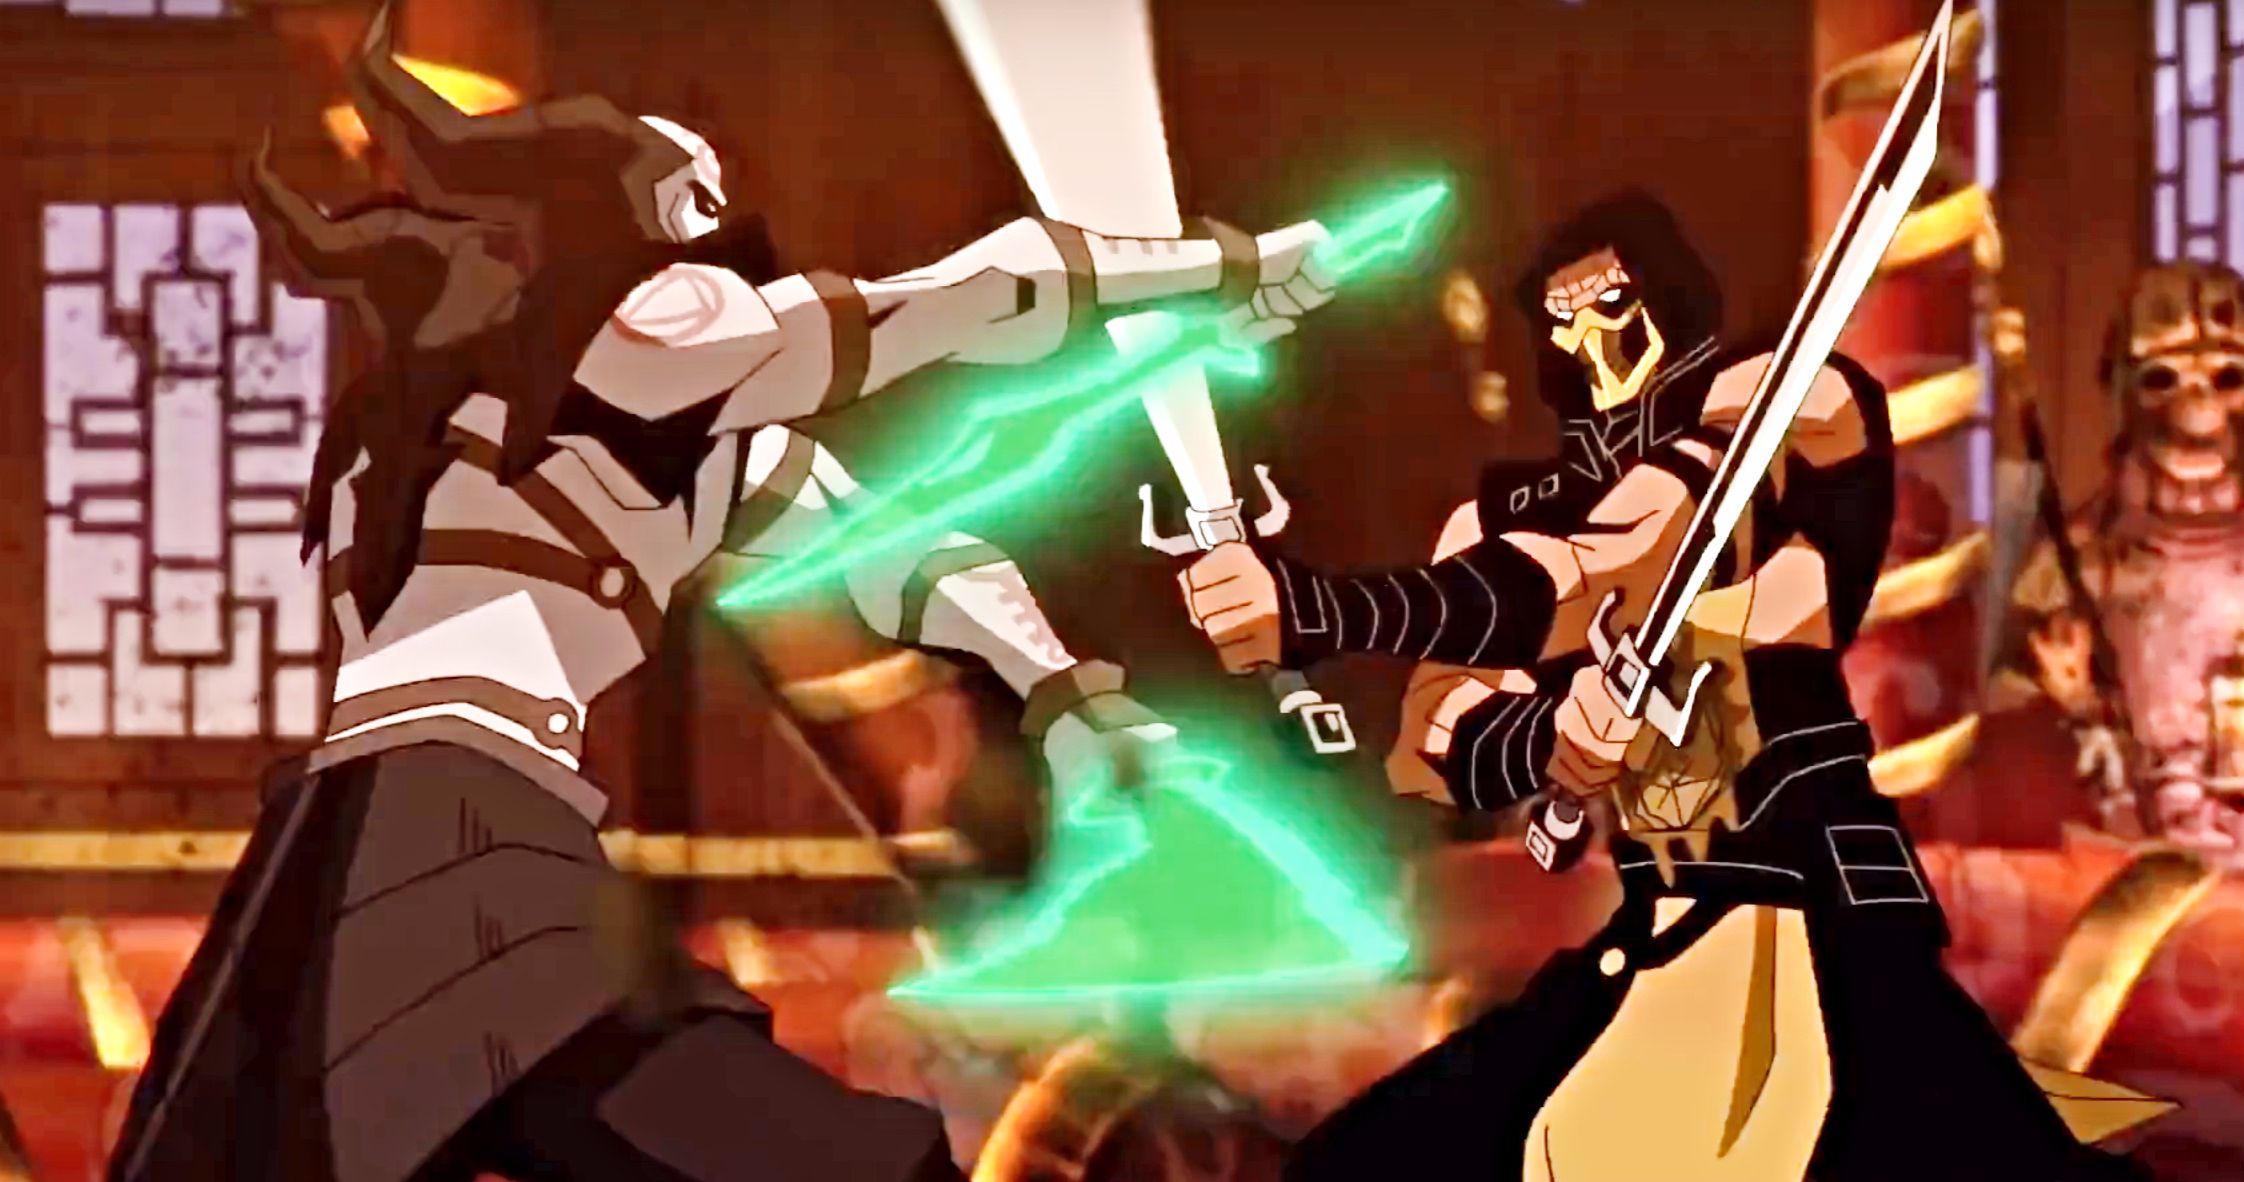 Mortal Kombat Legends: Scorpion's Revenge Trailer Brings First Look at R-Rated Animated Movie